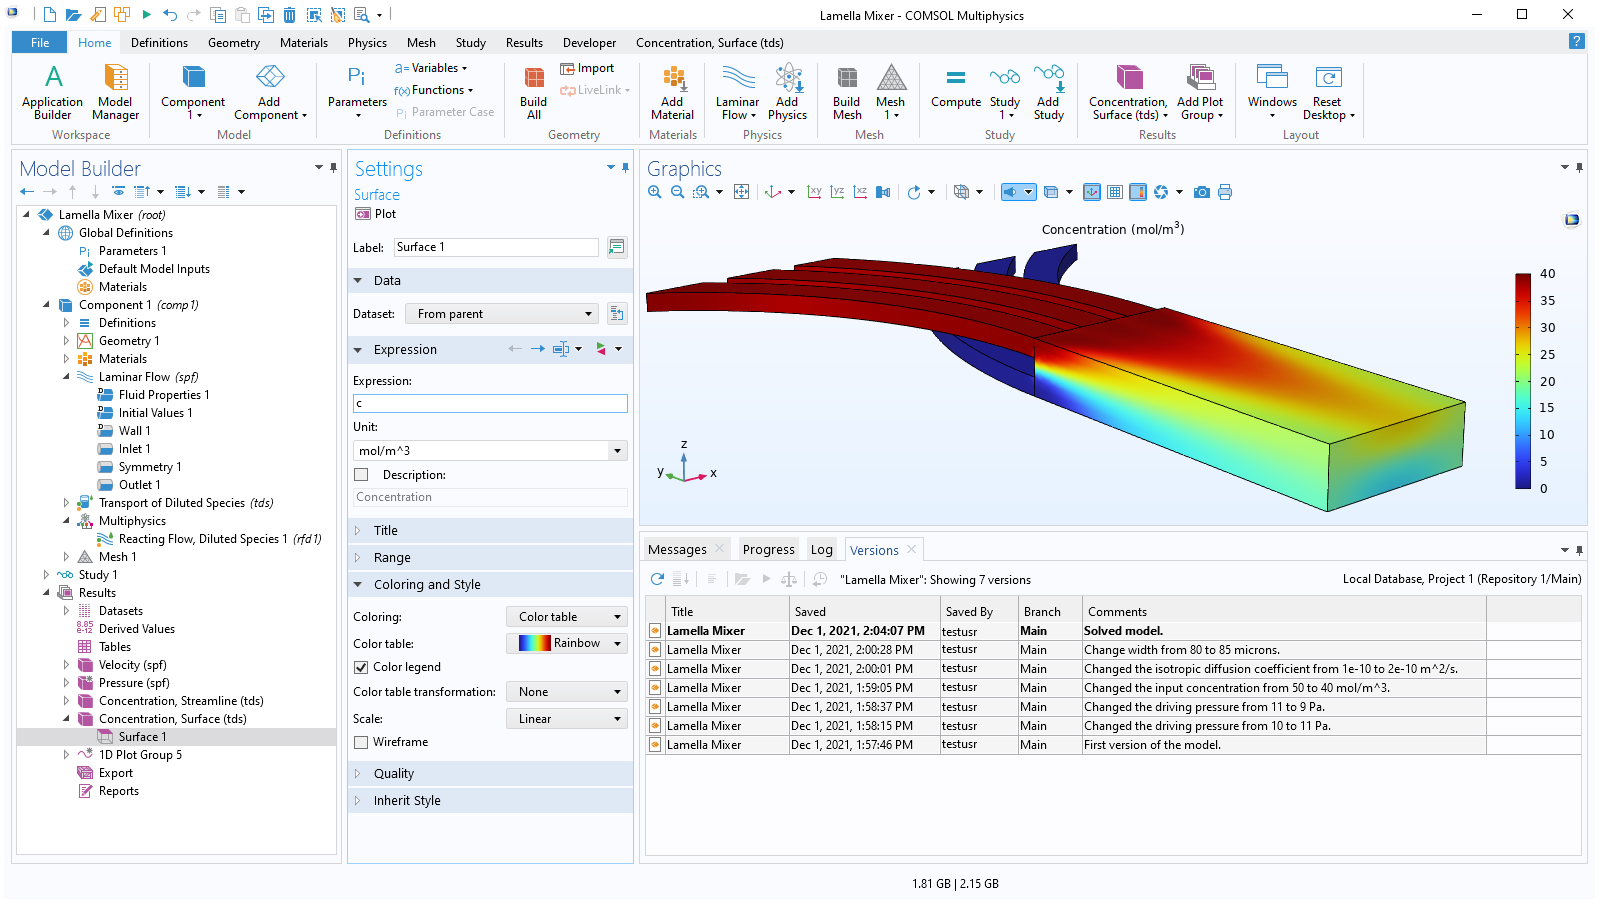 The COMSOL Multiphysics user interface showing a mixer model in the Graphics window and a list of the different versions of the model.